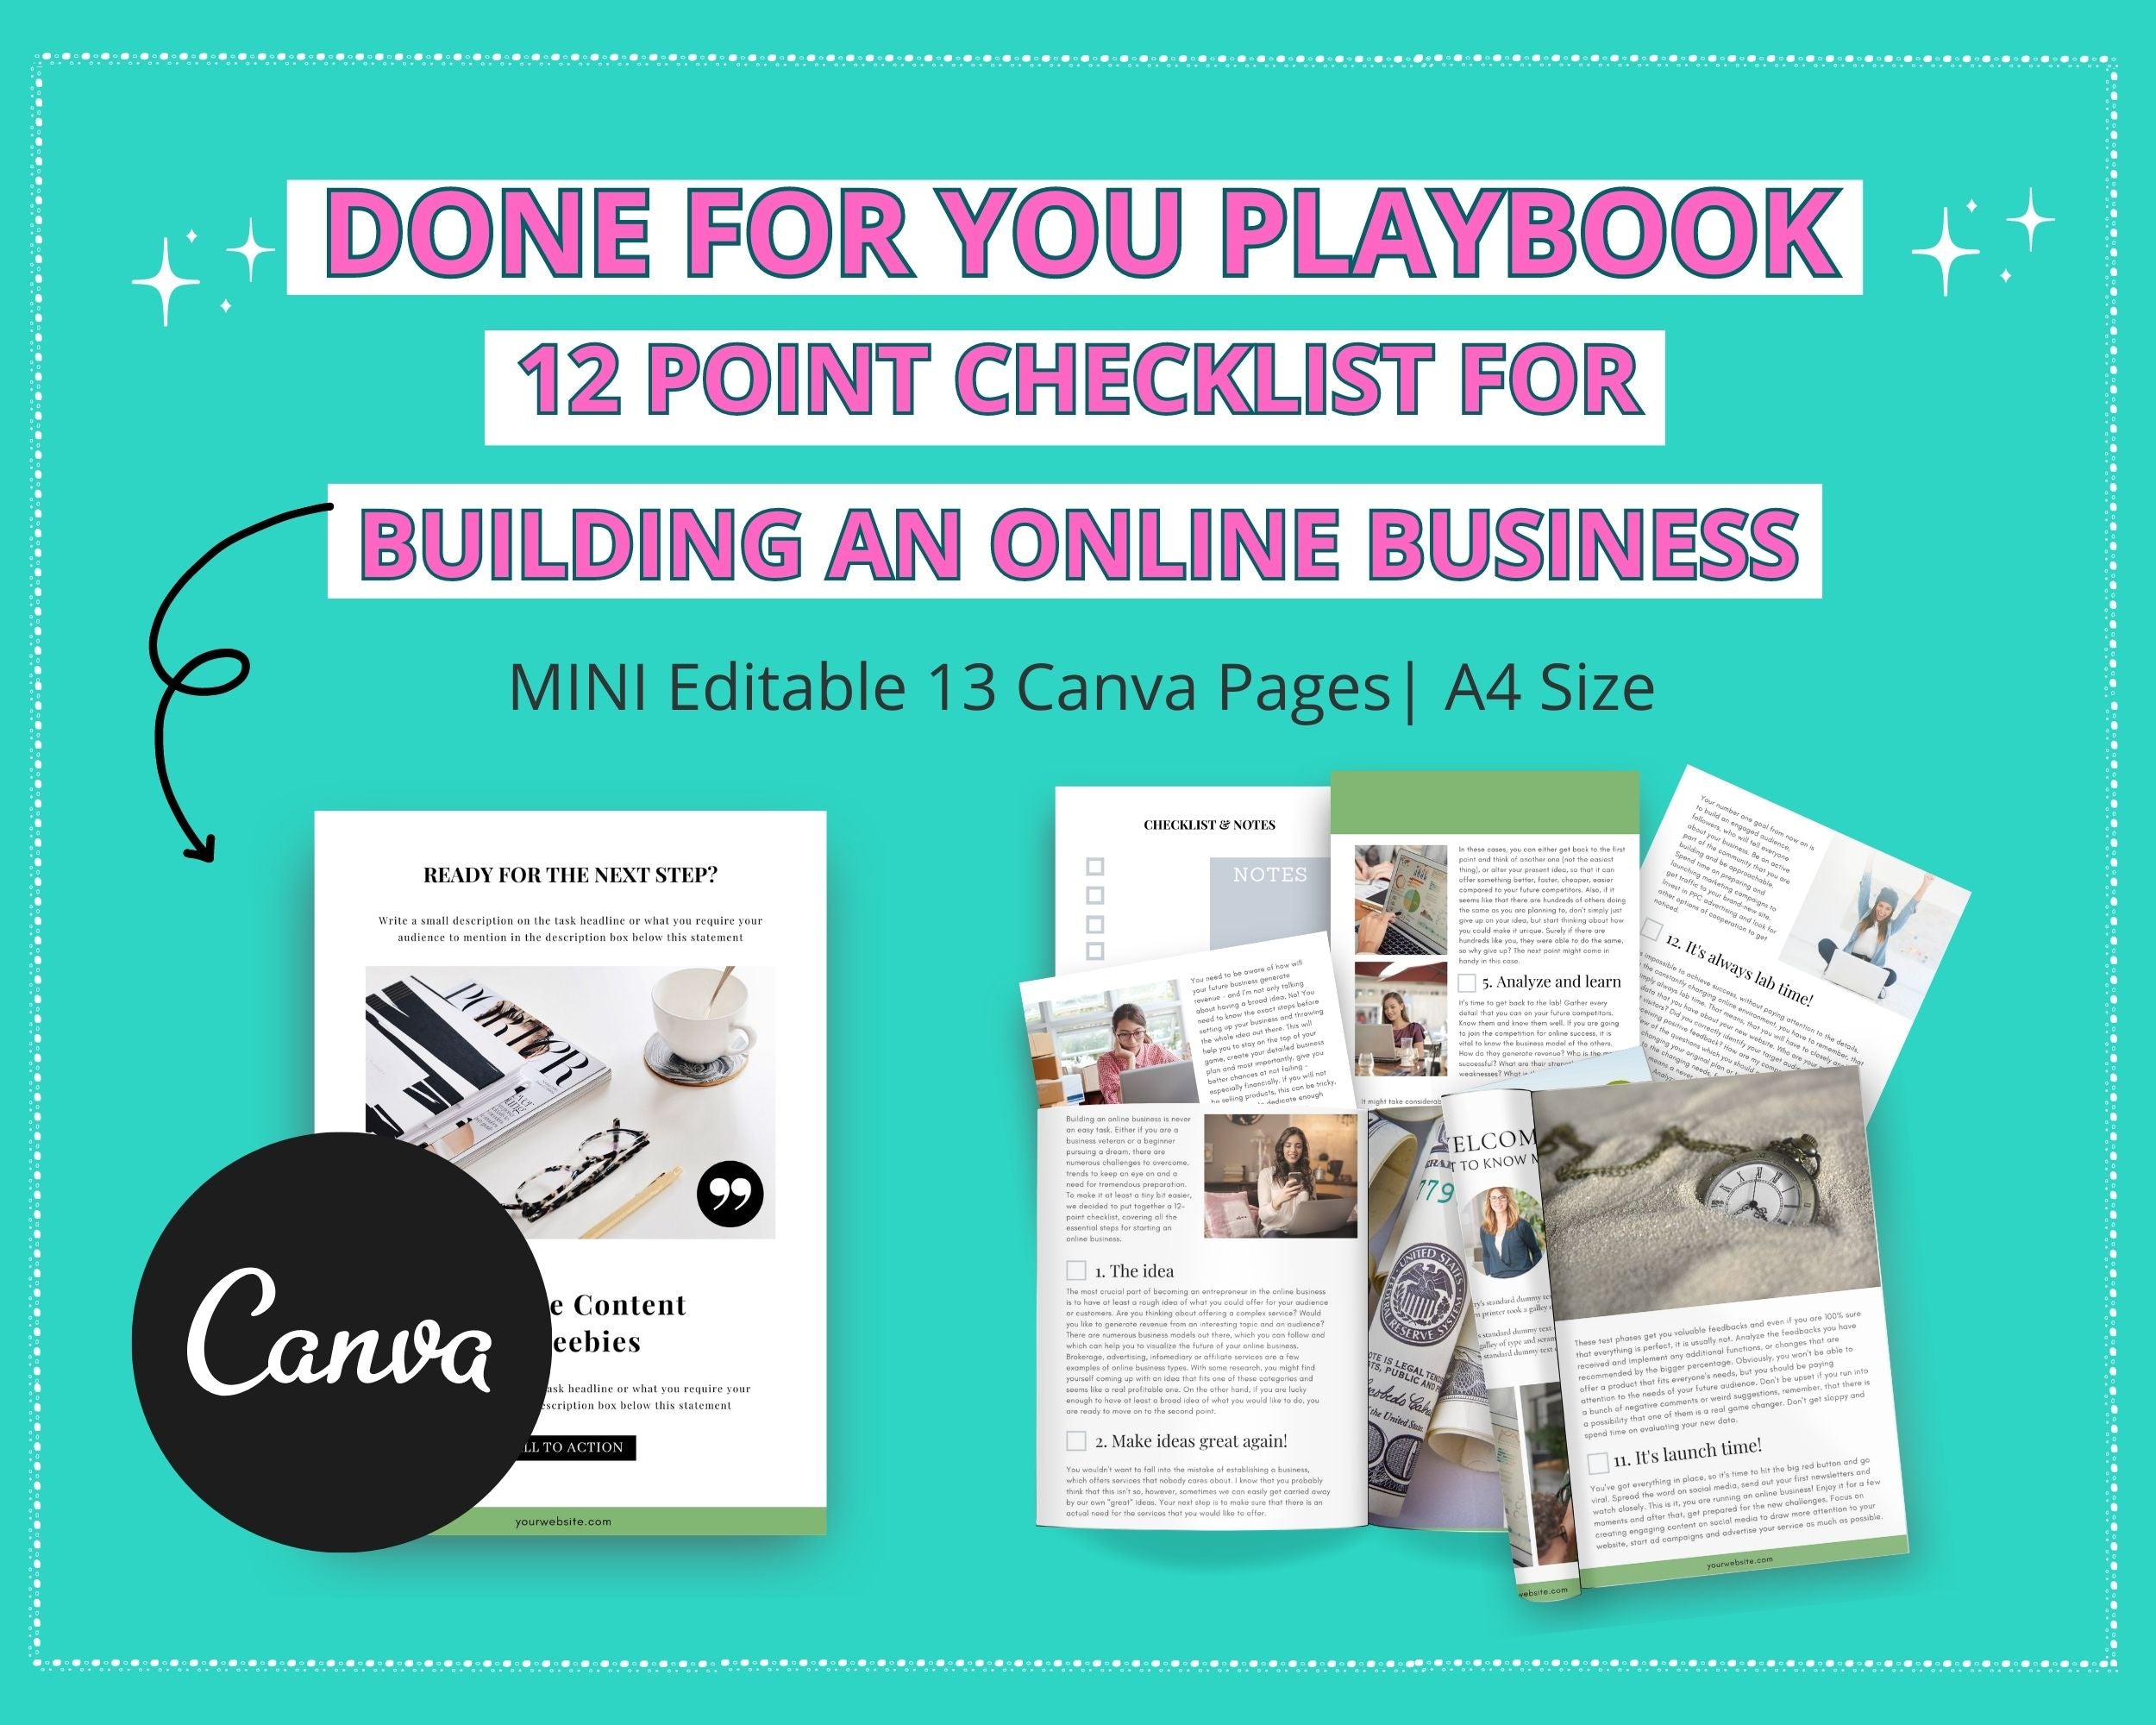 Done-for-You Mini 12 Point Checklist For Building Online Business